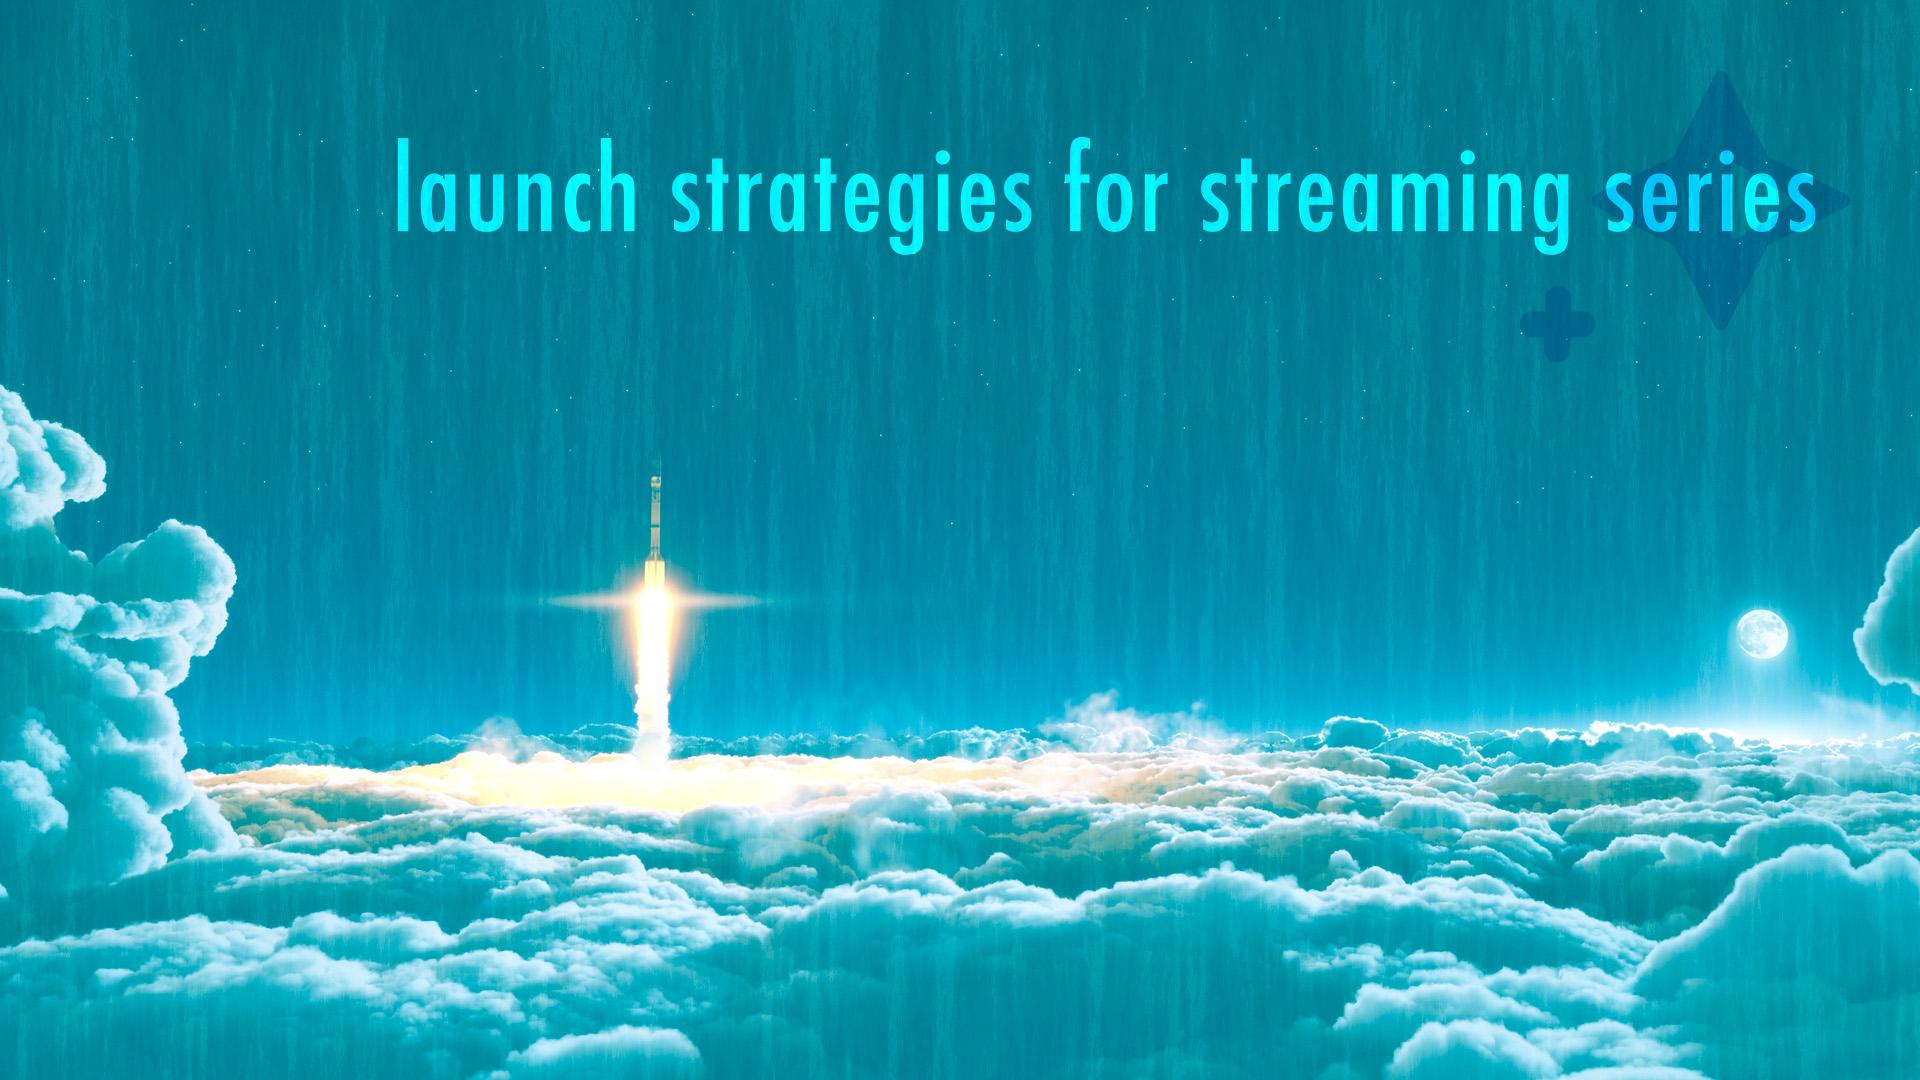 Strategies for Launching a Streaming Series